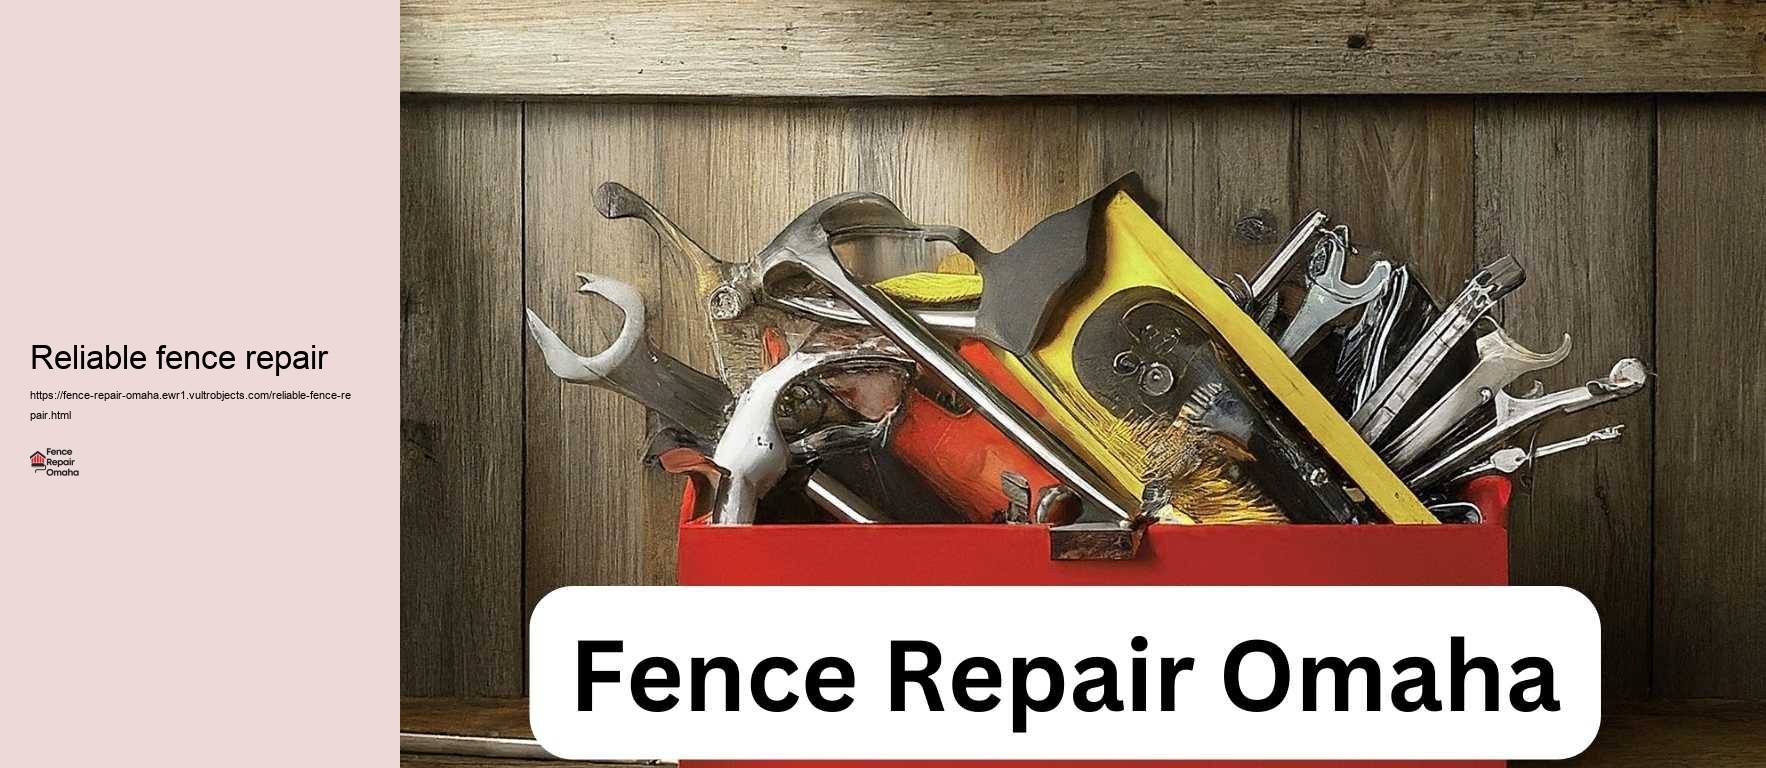 Reliable fence repair